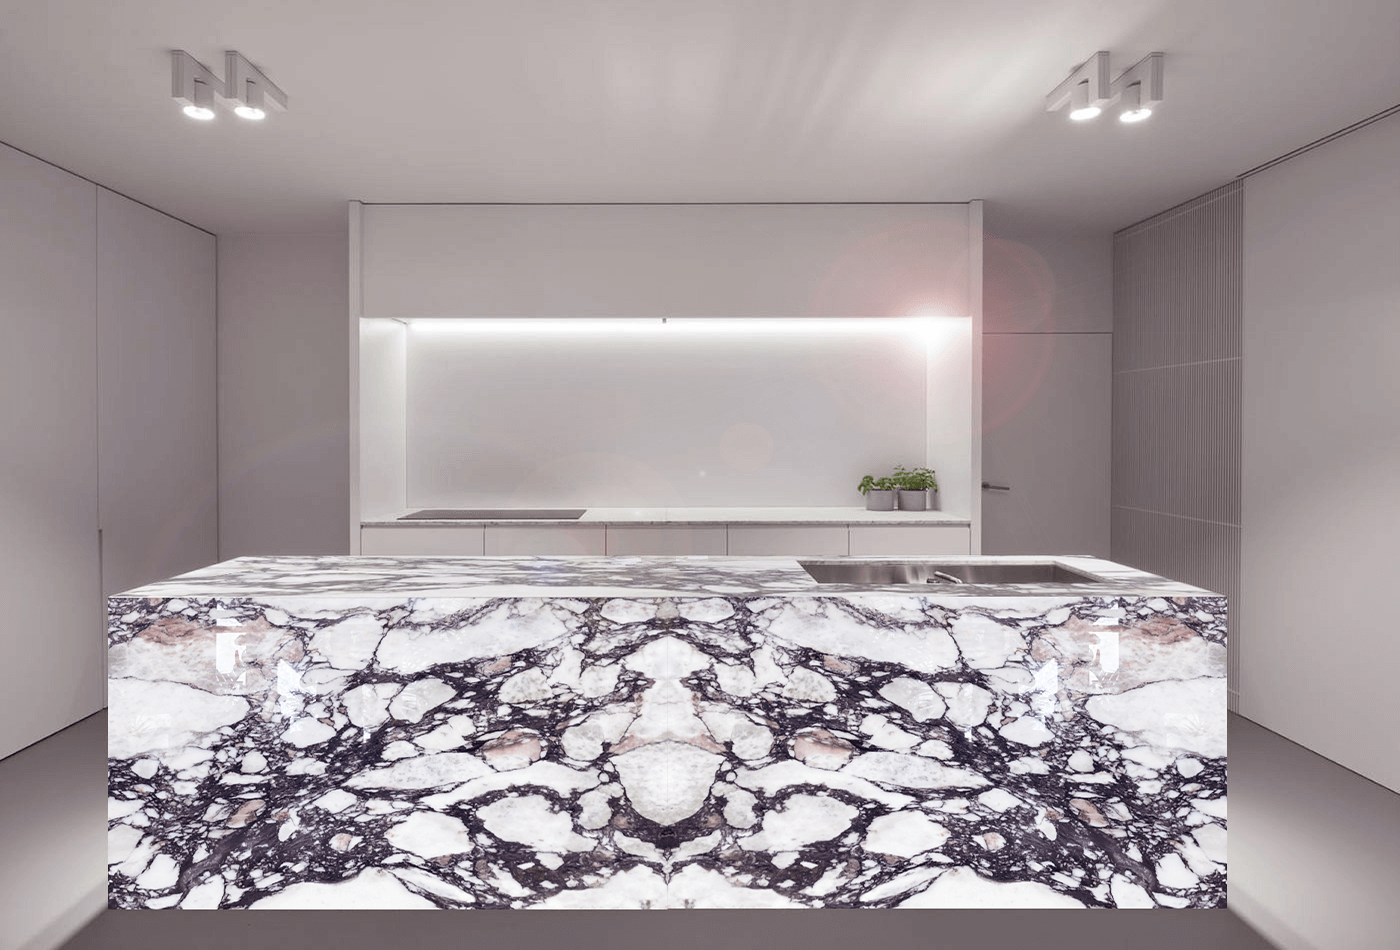 Calacatta Viola Porcelain﻿; New Innovation at Your Door Step